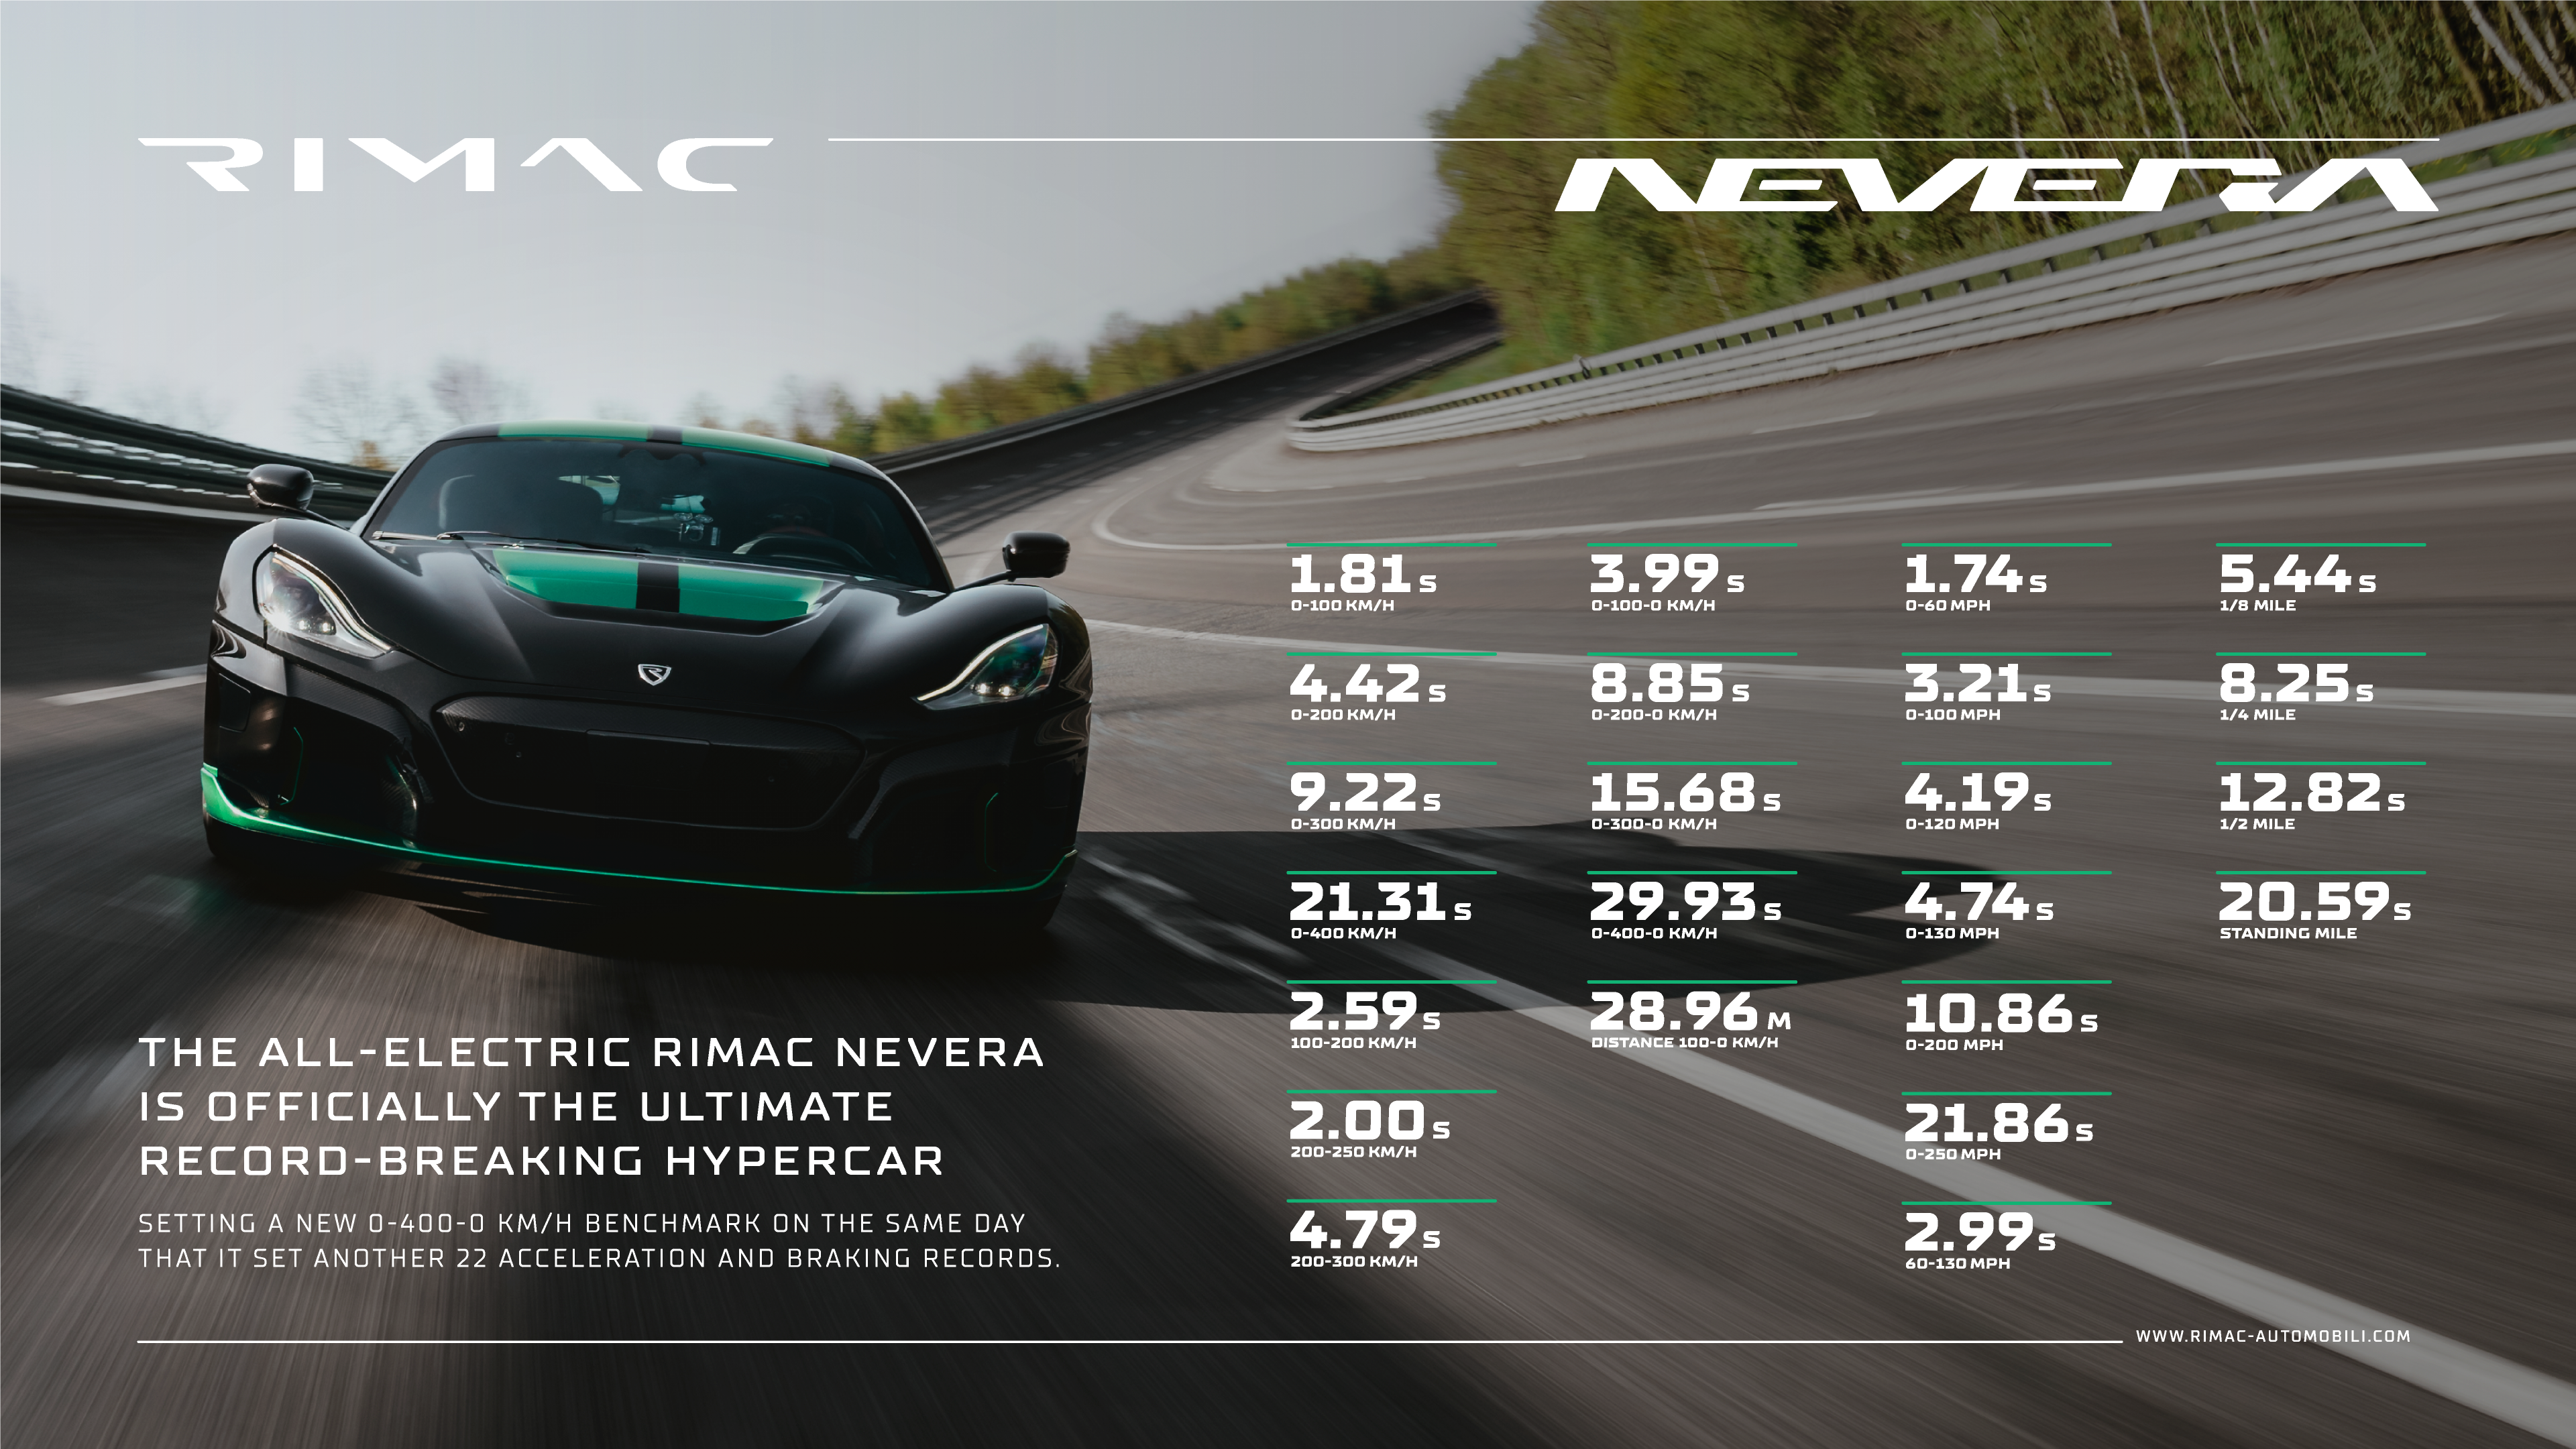 Rimac Nevera Sets 23 Performance Records in a Single Day – Rimac Newsroom